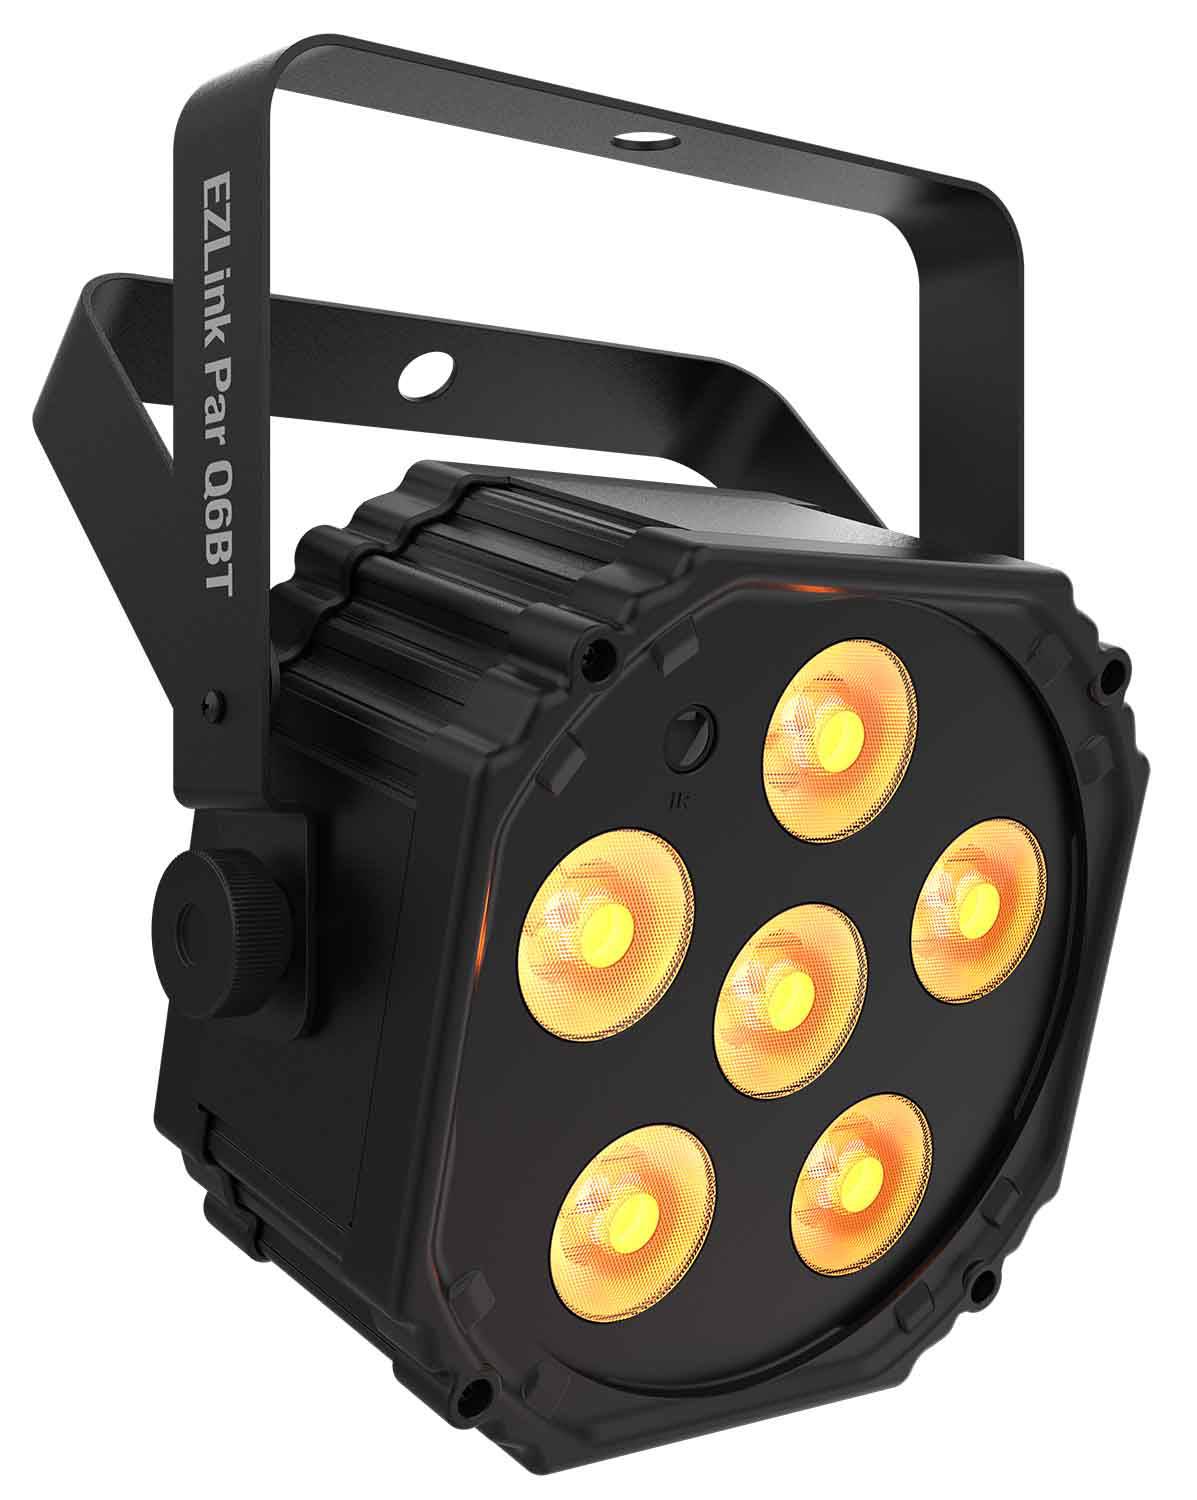 Chauvet DJ Lighting Package for Streaming and Podcast - Hollywood DJ